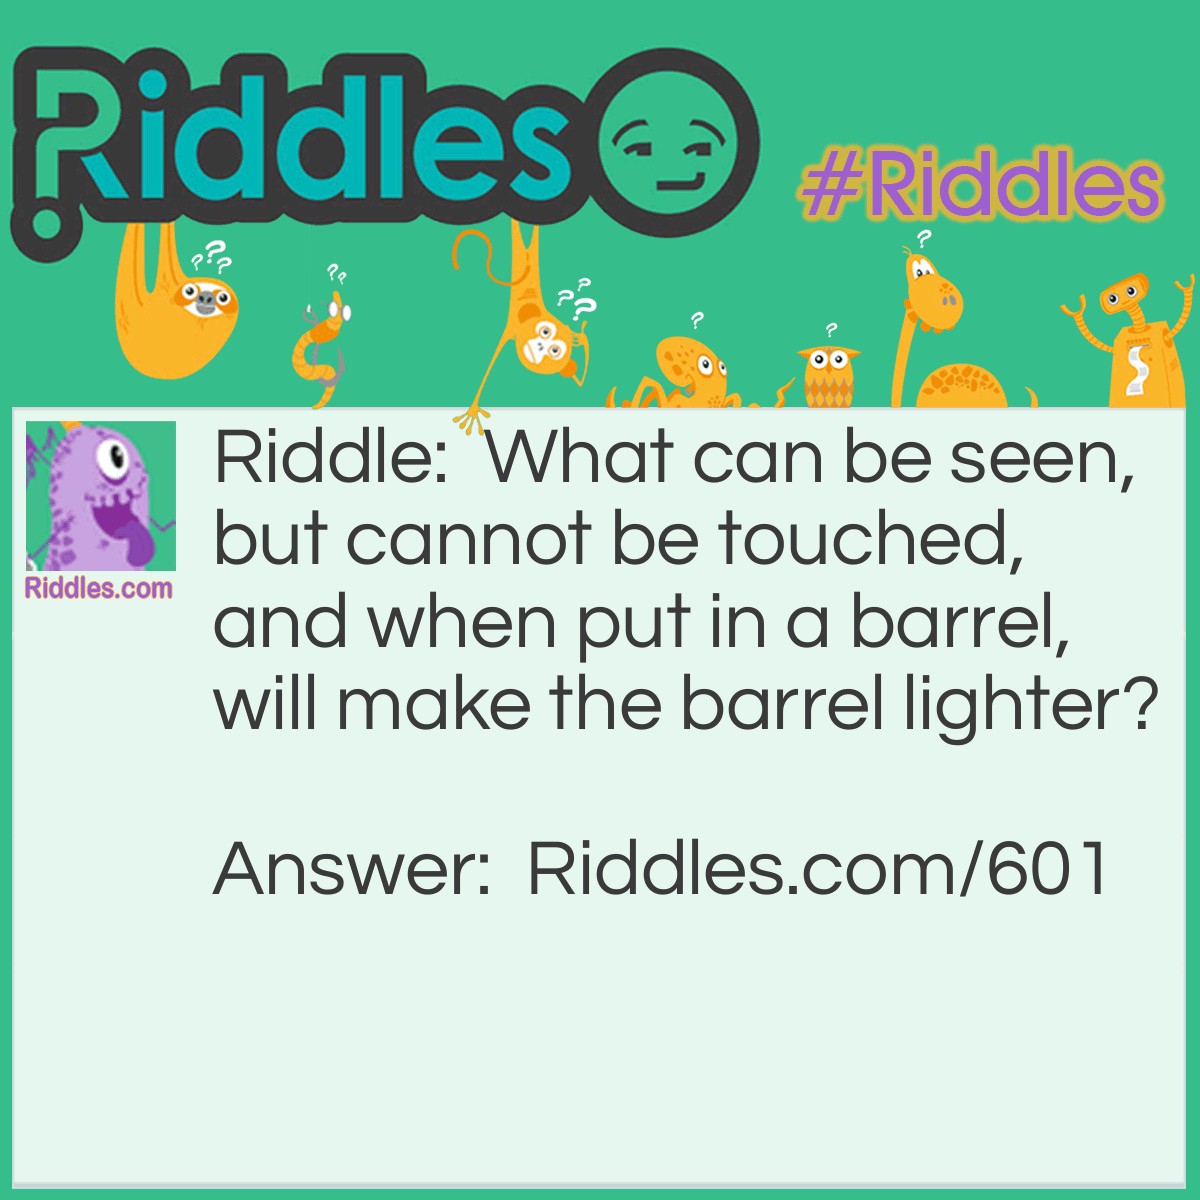 Riddle: What can be seen, but cannot be touched, and when put in a barrel, will make the barrel lighter? Answer: A beam of light!